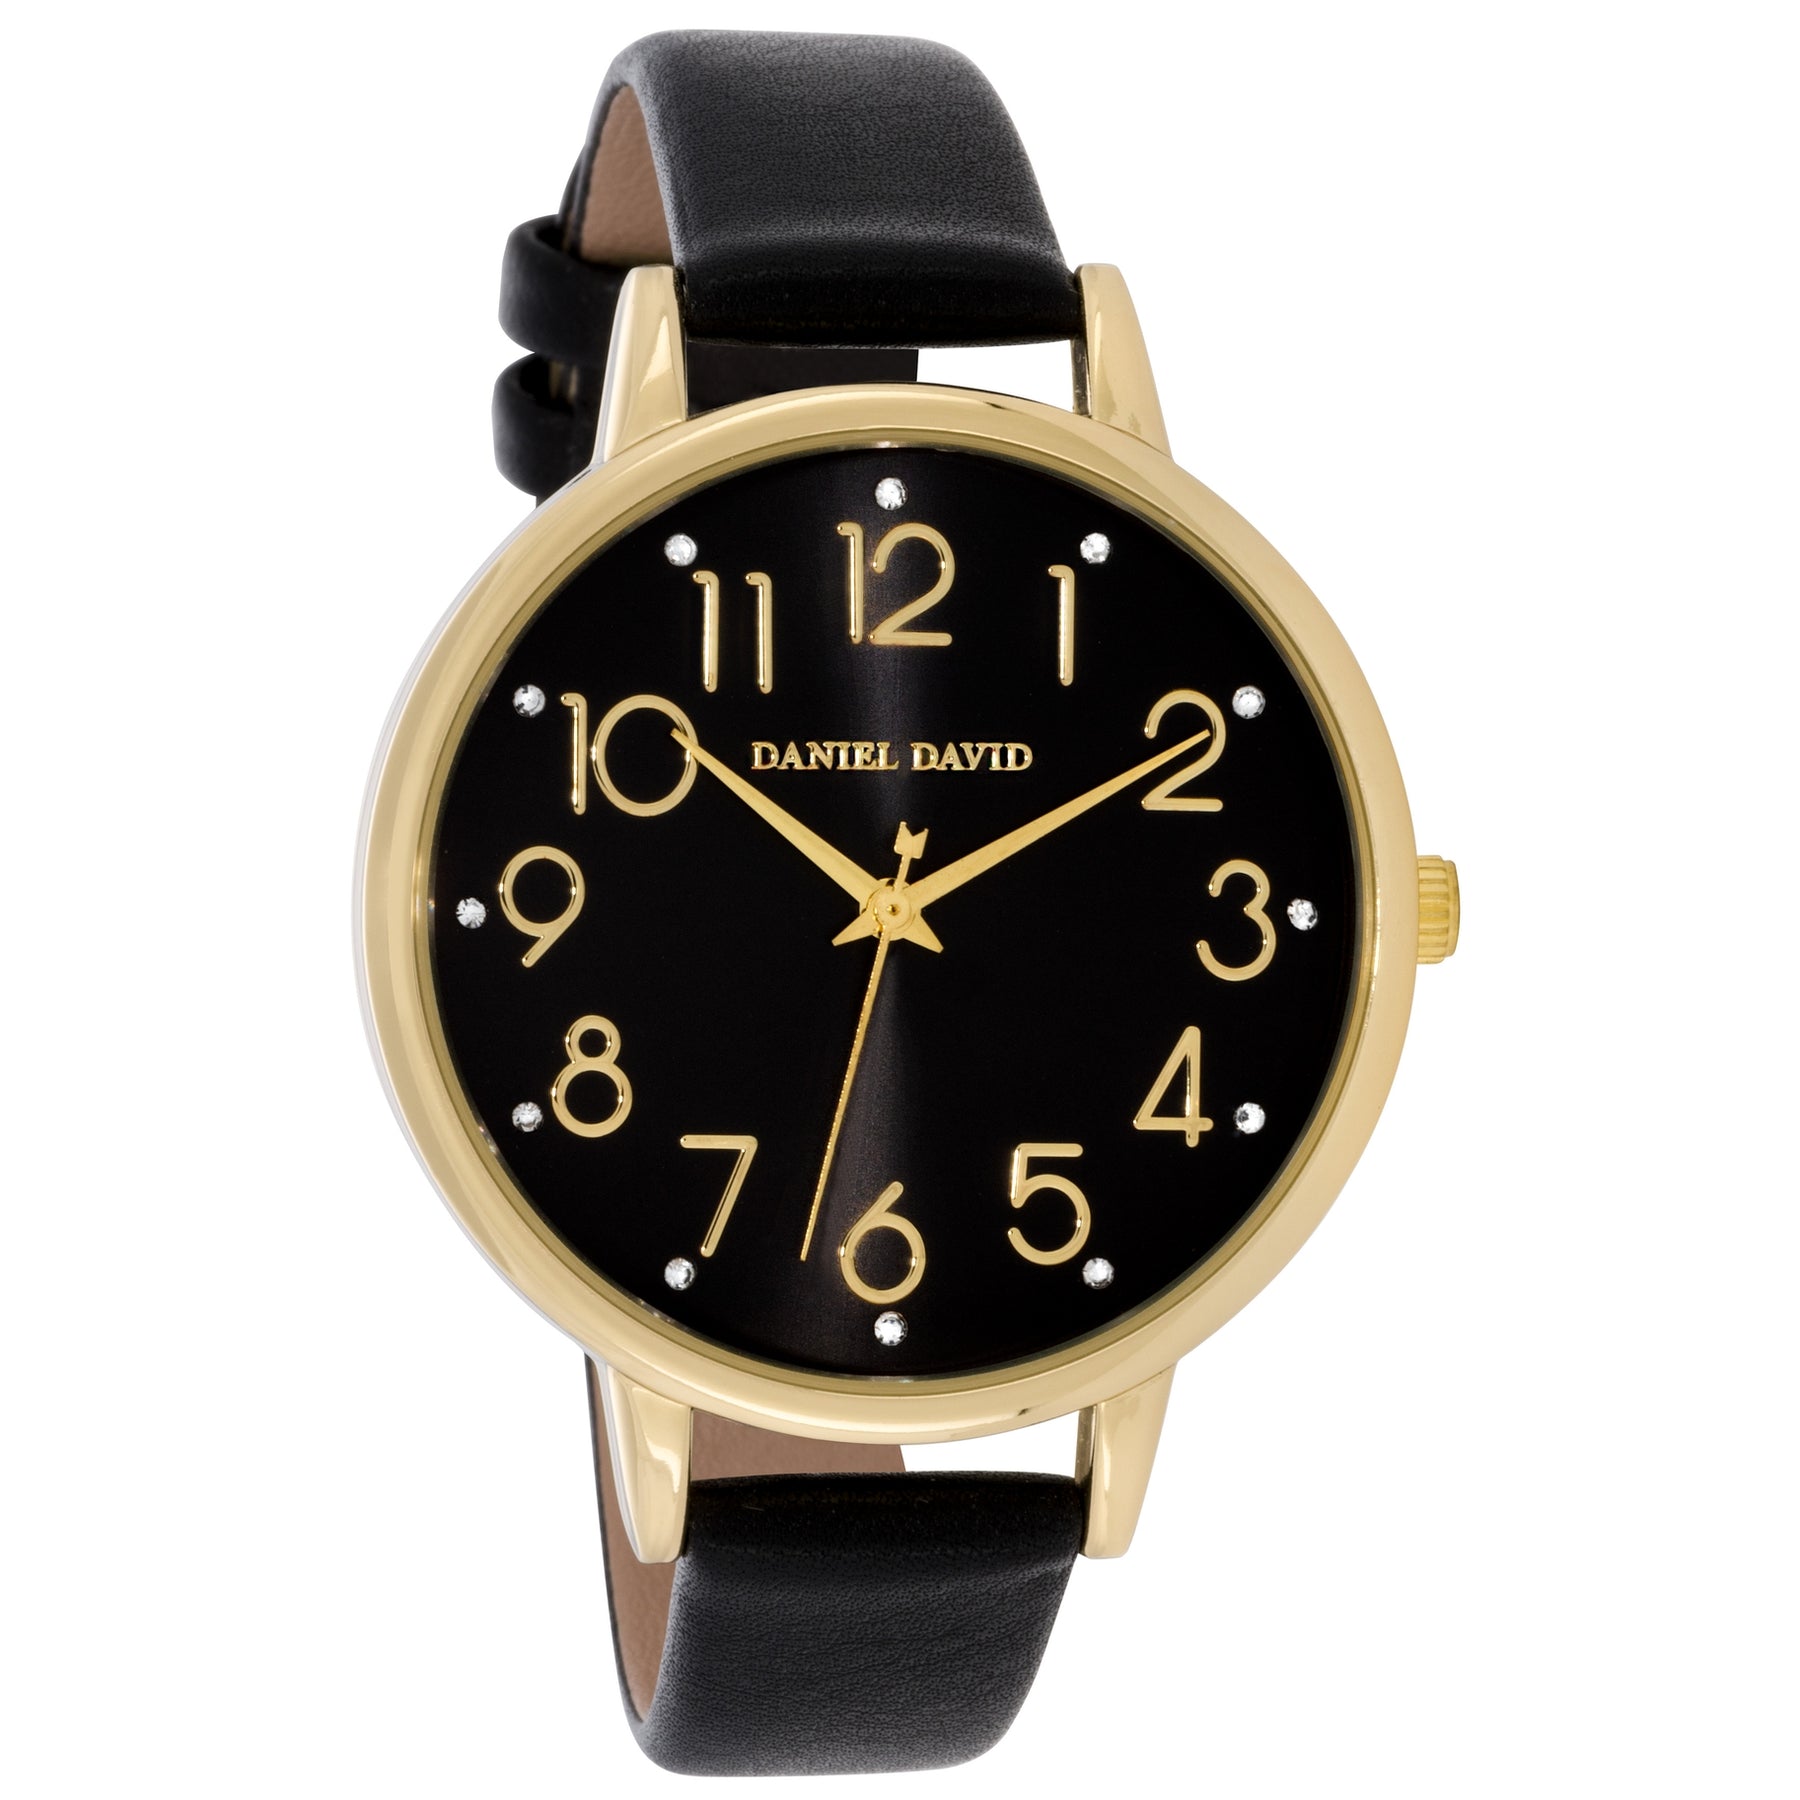 Marciano - Daniel David Women's Analog Watch - Black Face / Gold Numbers / White Stones